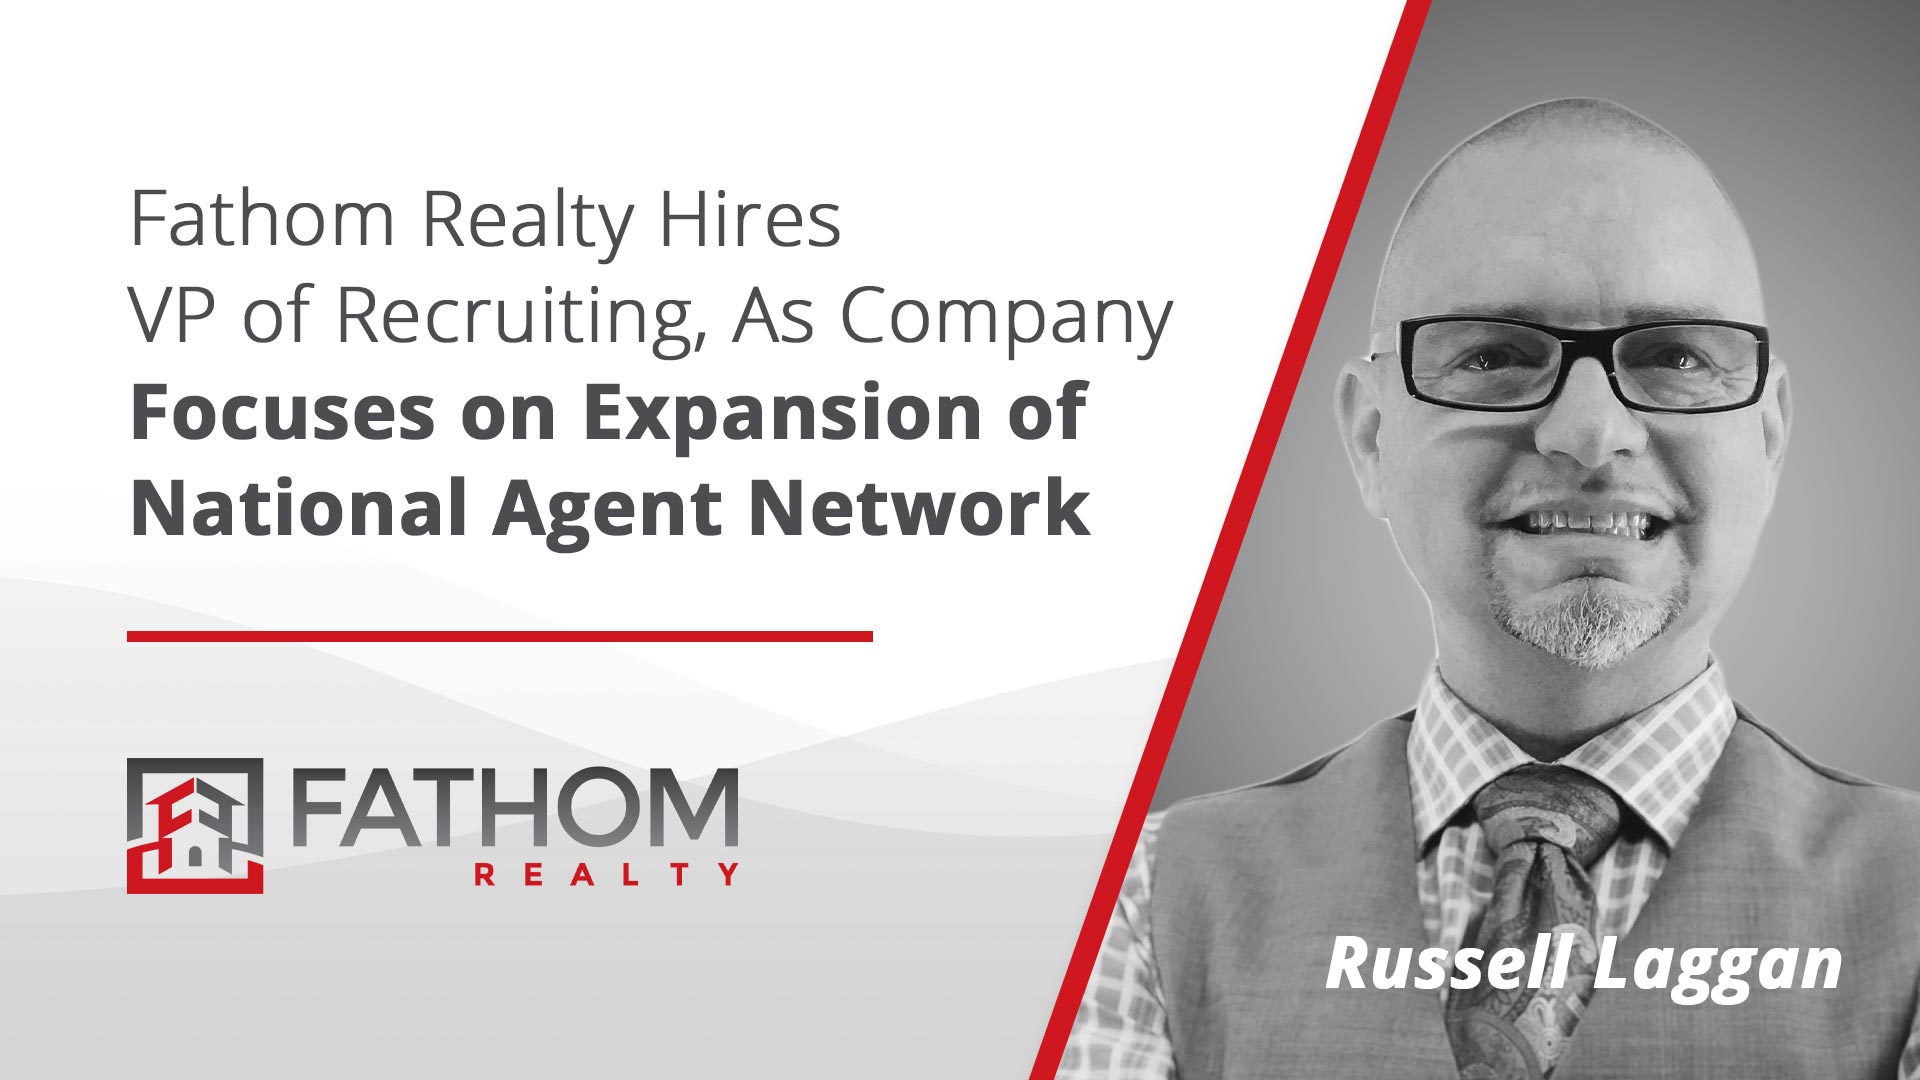 Featured image for “Fathom Realty Hires Vice President of Recruiting, as Company Focuses on Expansion of National Agent Network”